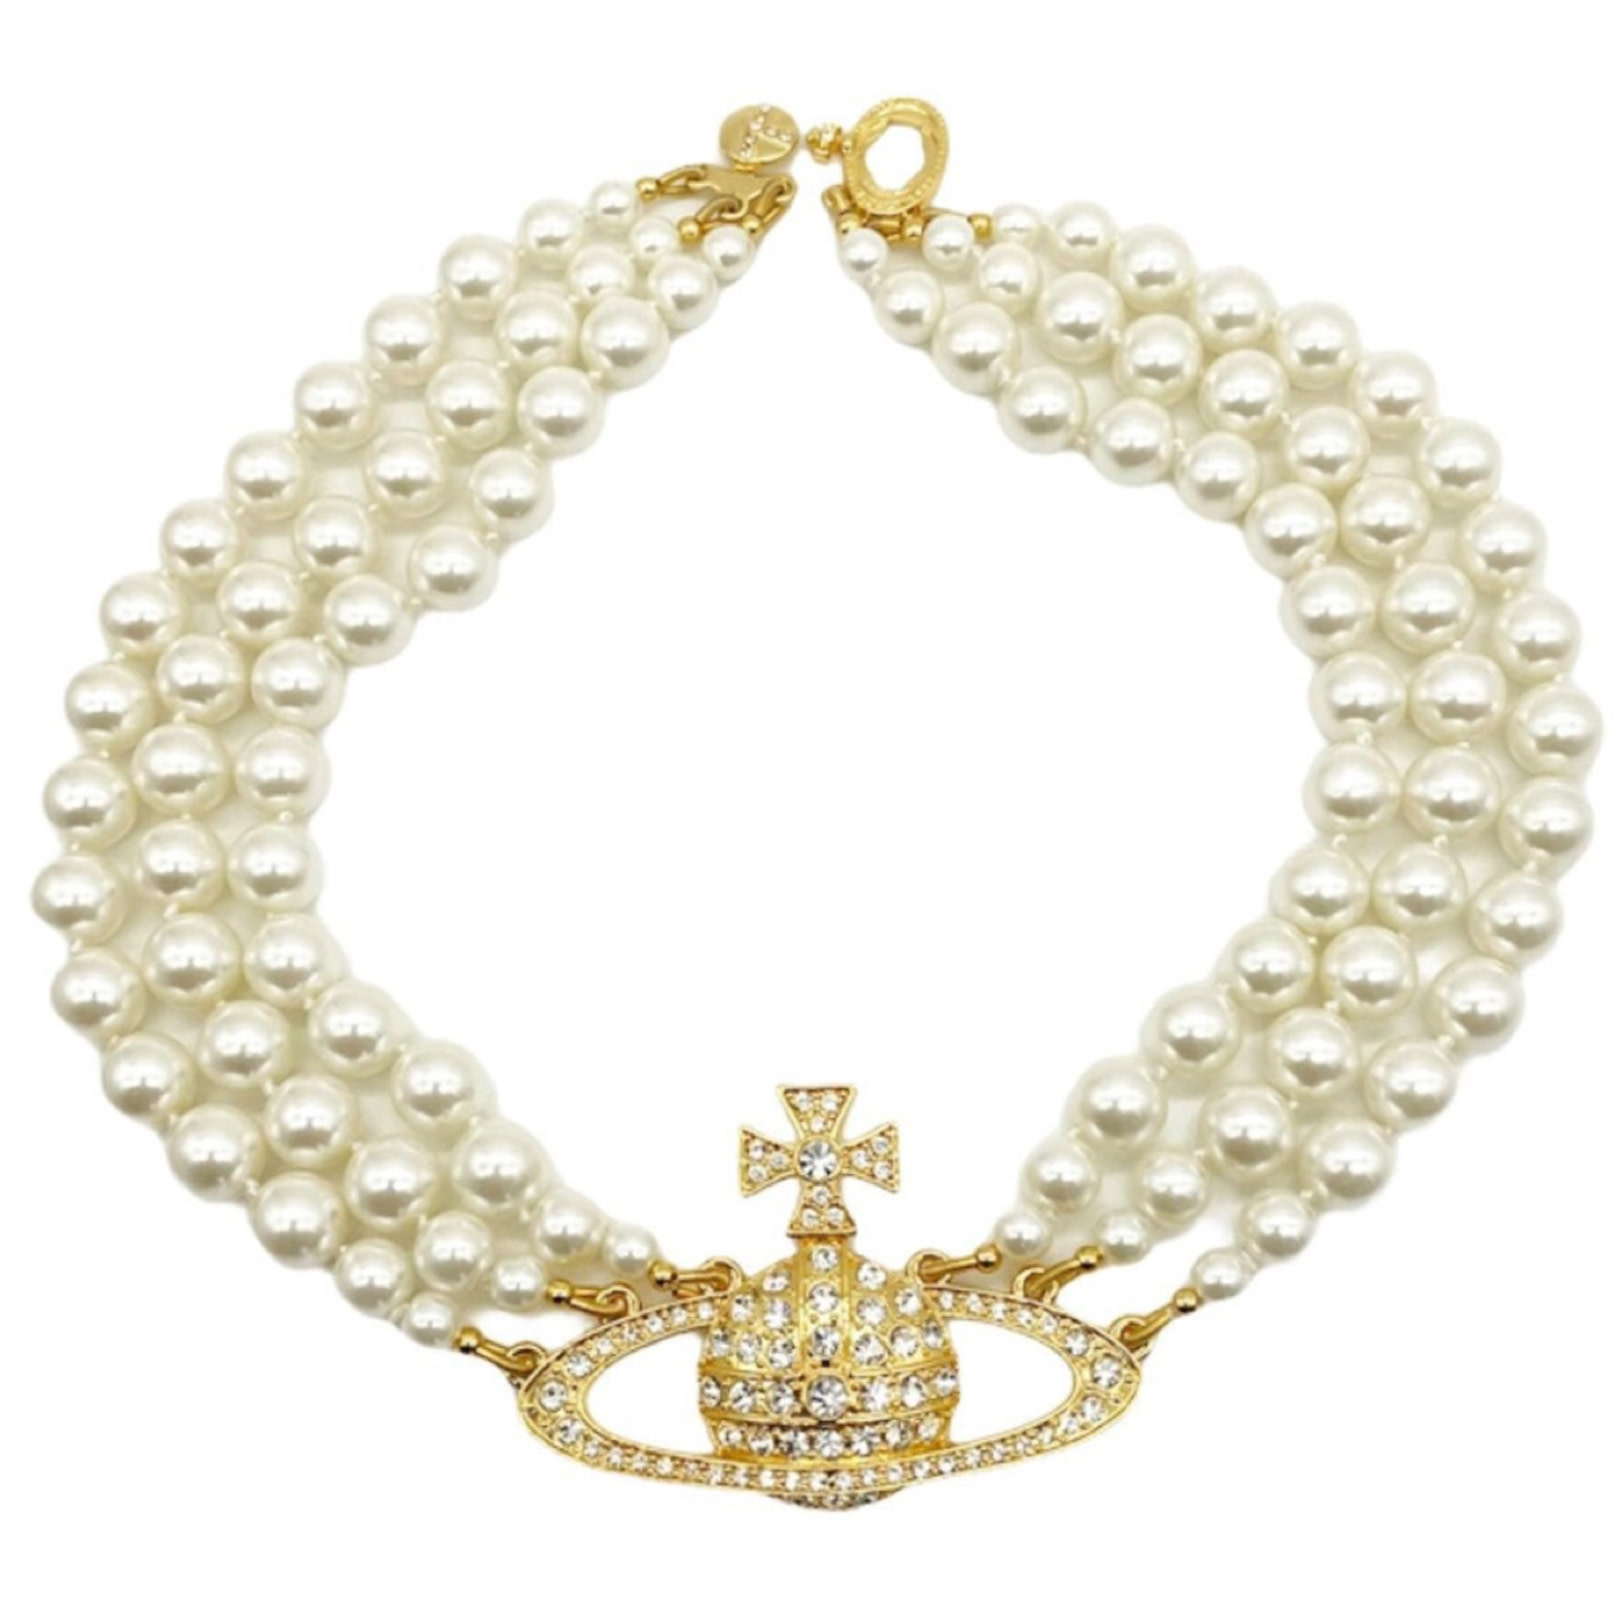 VIVIENNE WESTWOOD THREE ROW PEARL BAS RELIEF CHOKER GOLD